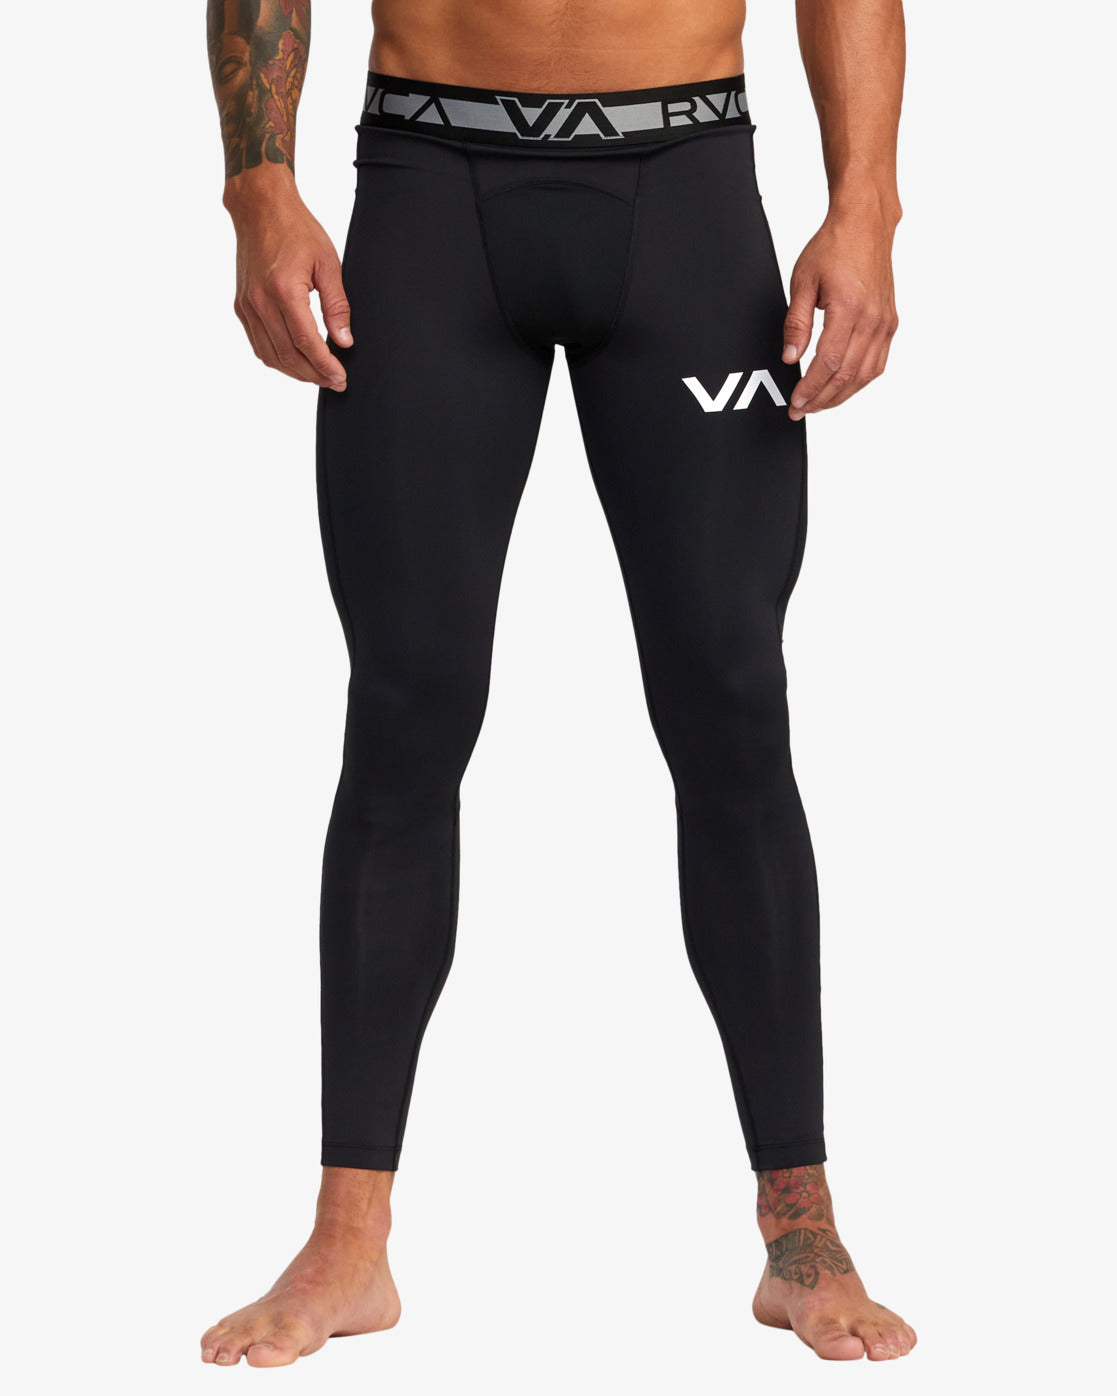 Why Wear Compression Pants? 6 Benefits Explained